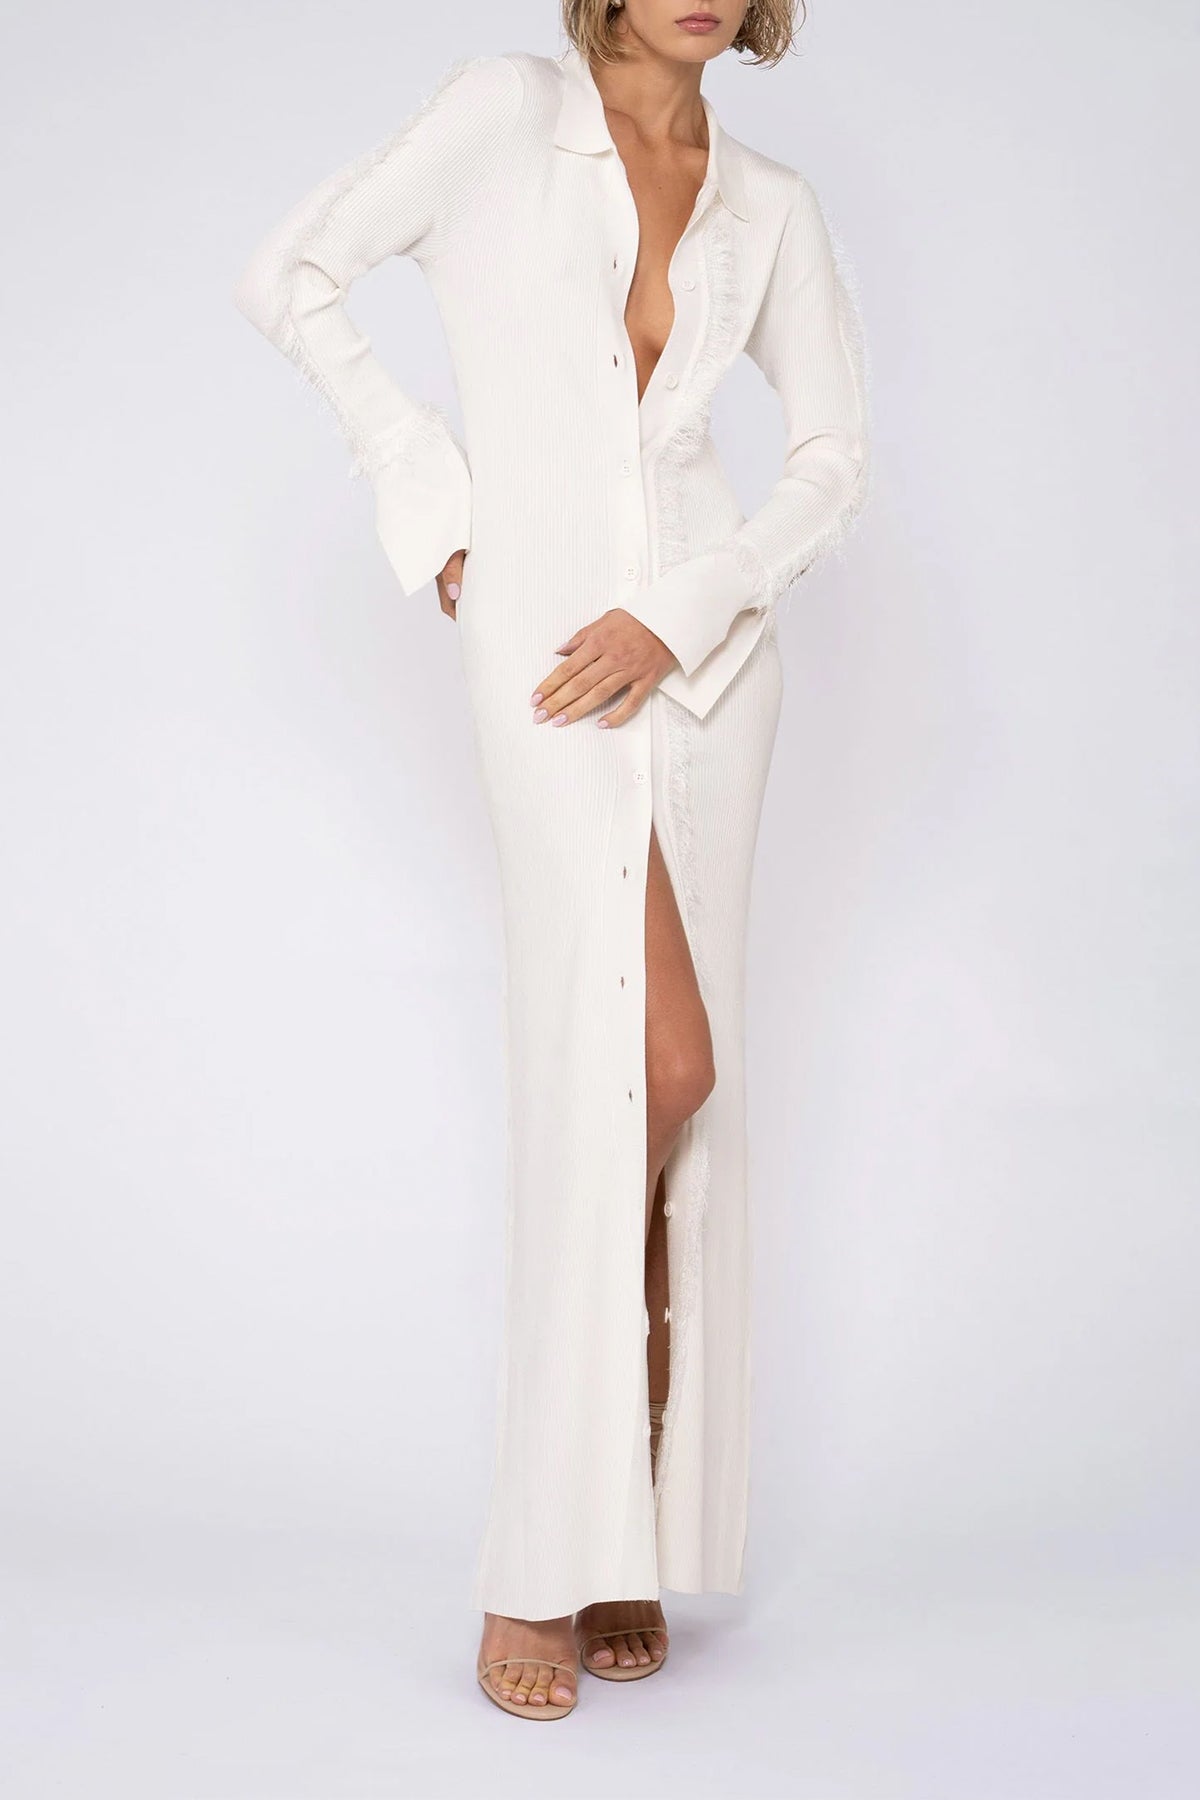 Willow Dress in Ivory - shop - olivia.com